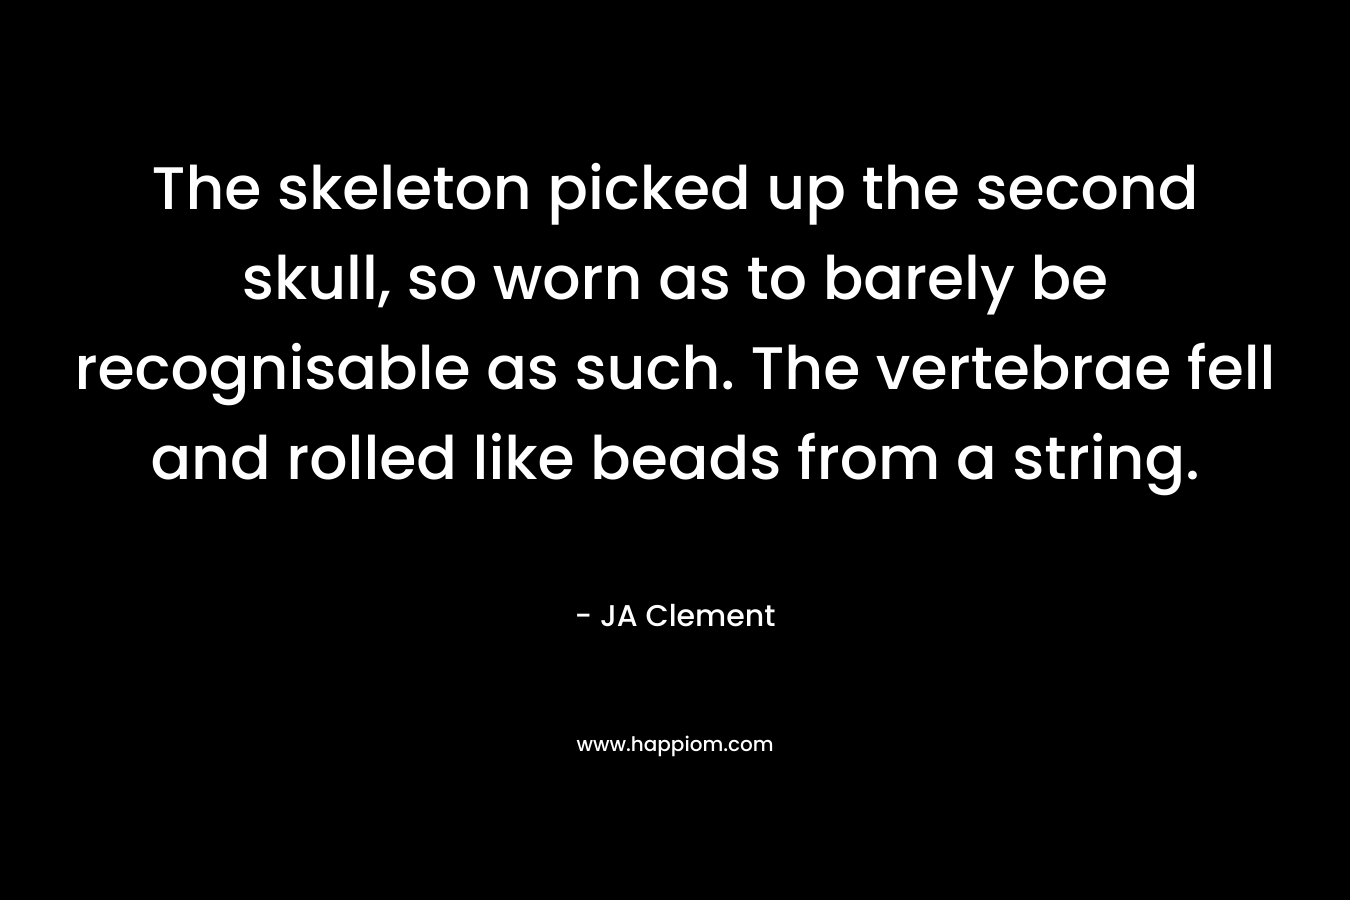 The skeleton picked up the second skull, so worn as to barely be recognisable as such. The vertebrae fell and rolled like beads from a string. – JA Clement